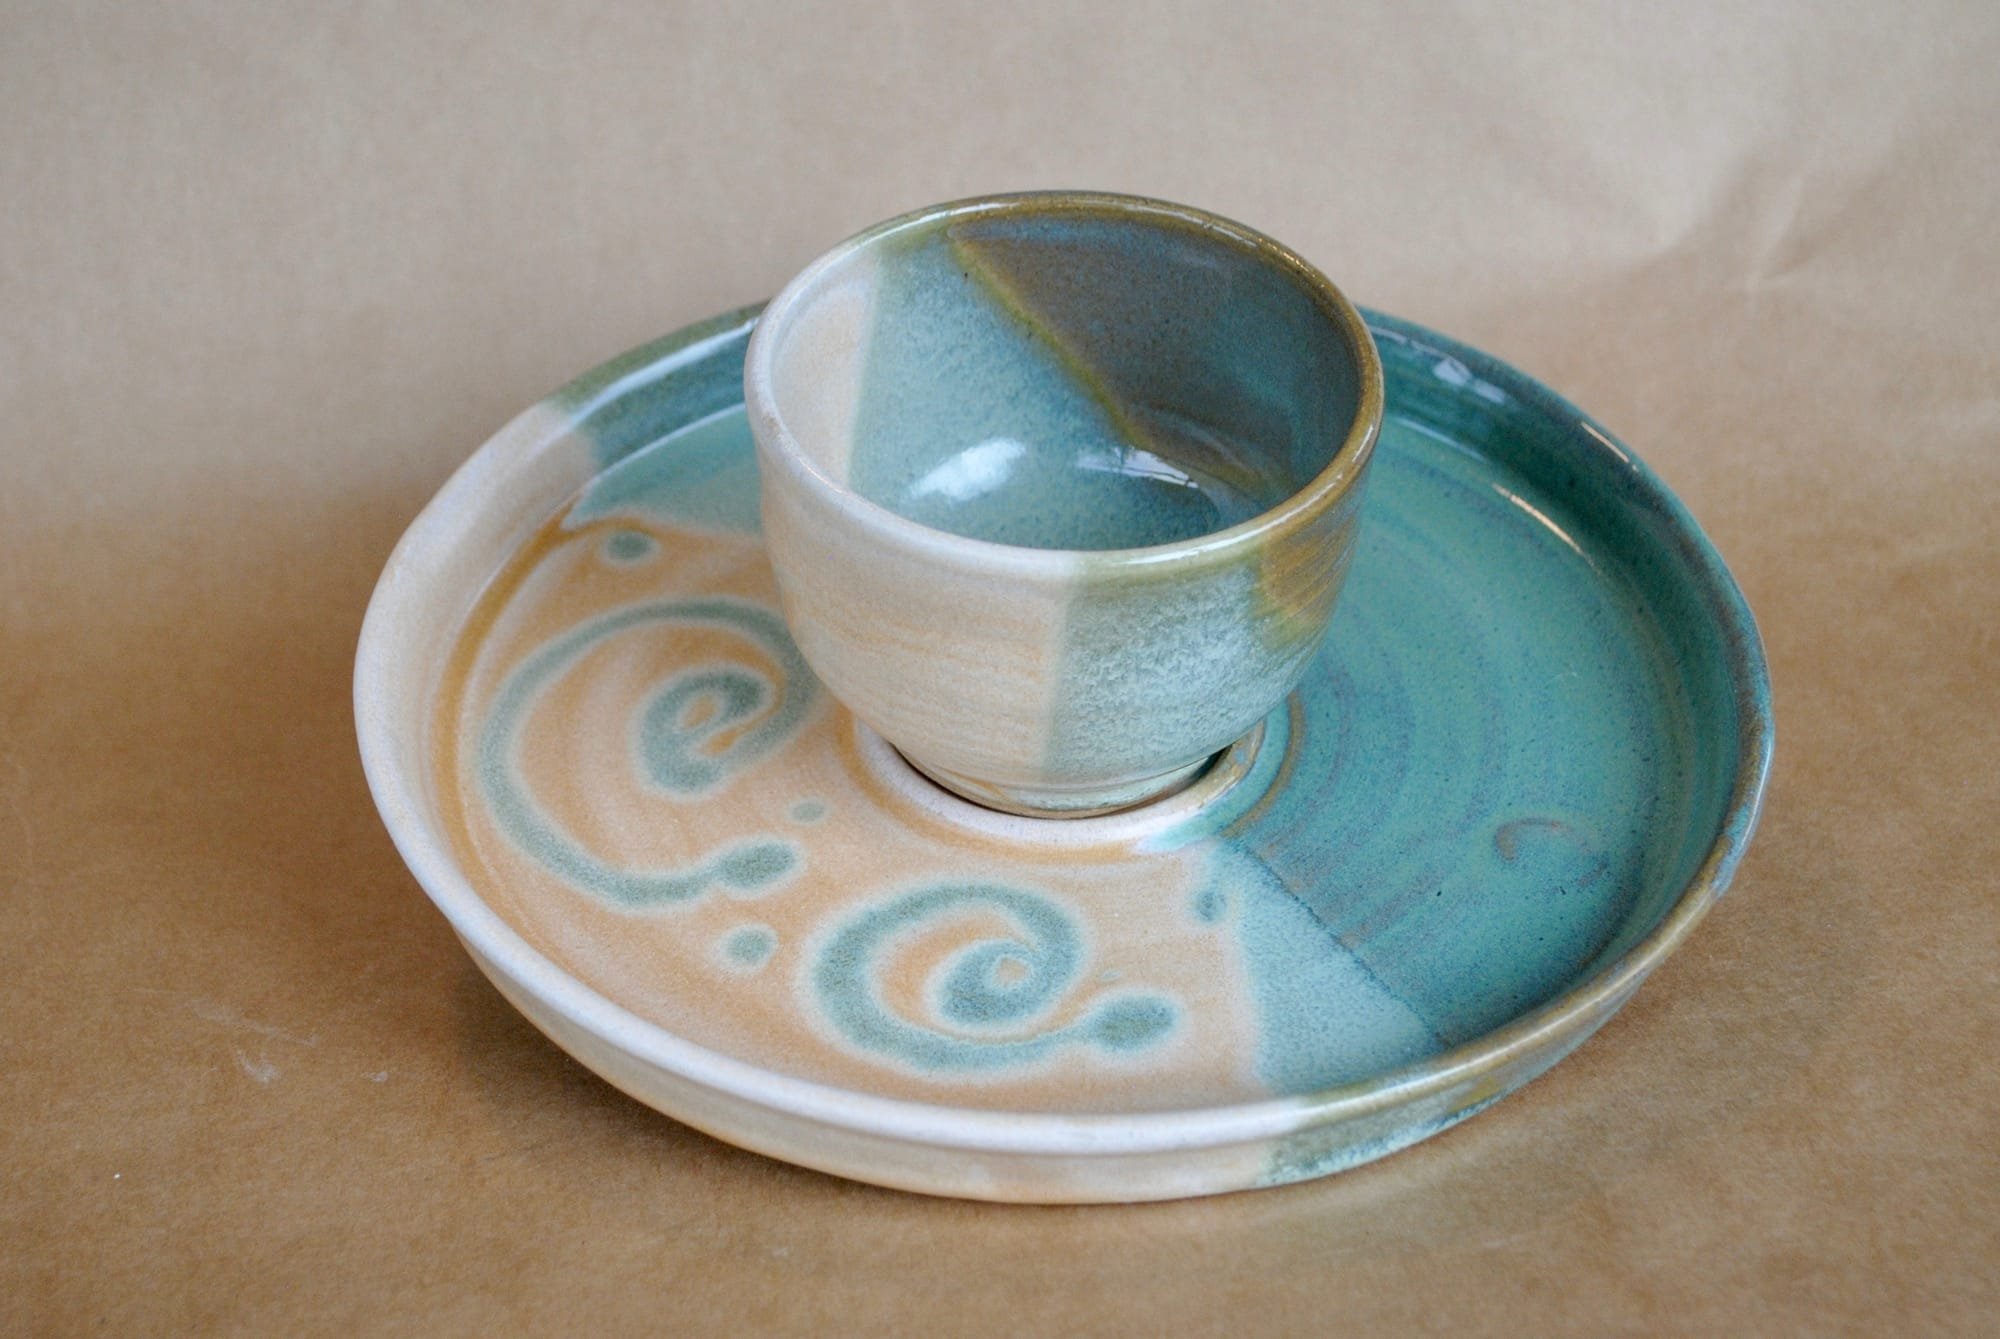 Serving Tray with Lovely Swirled Design